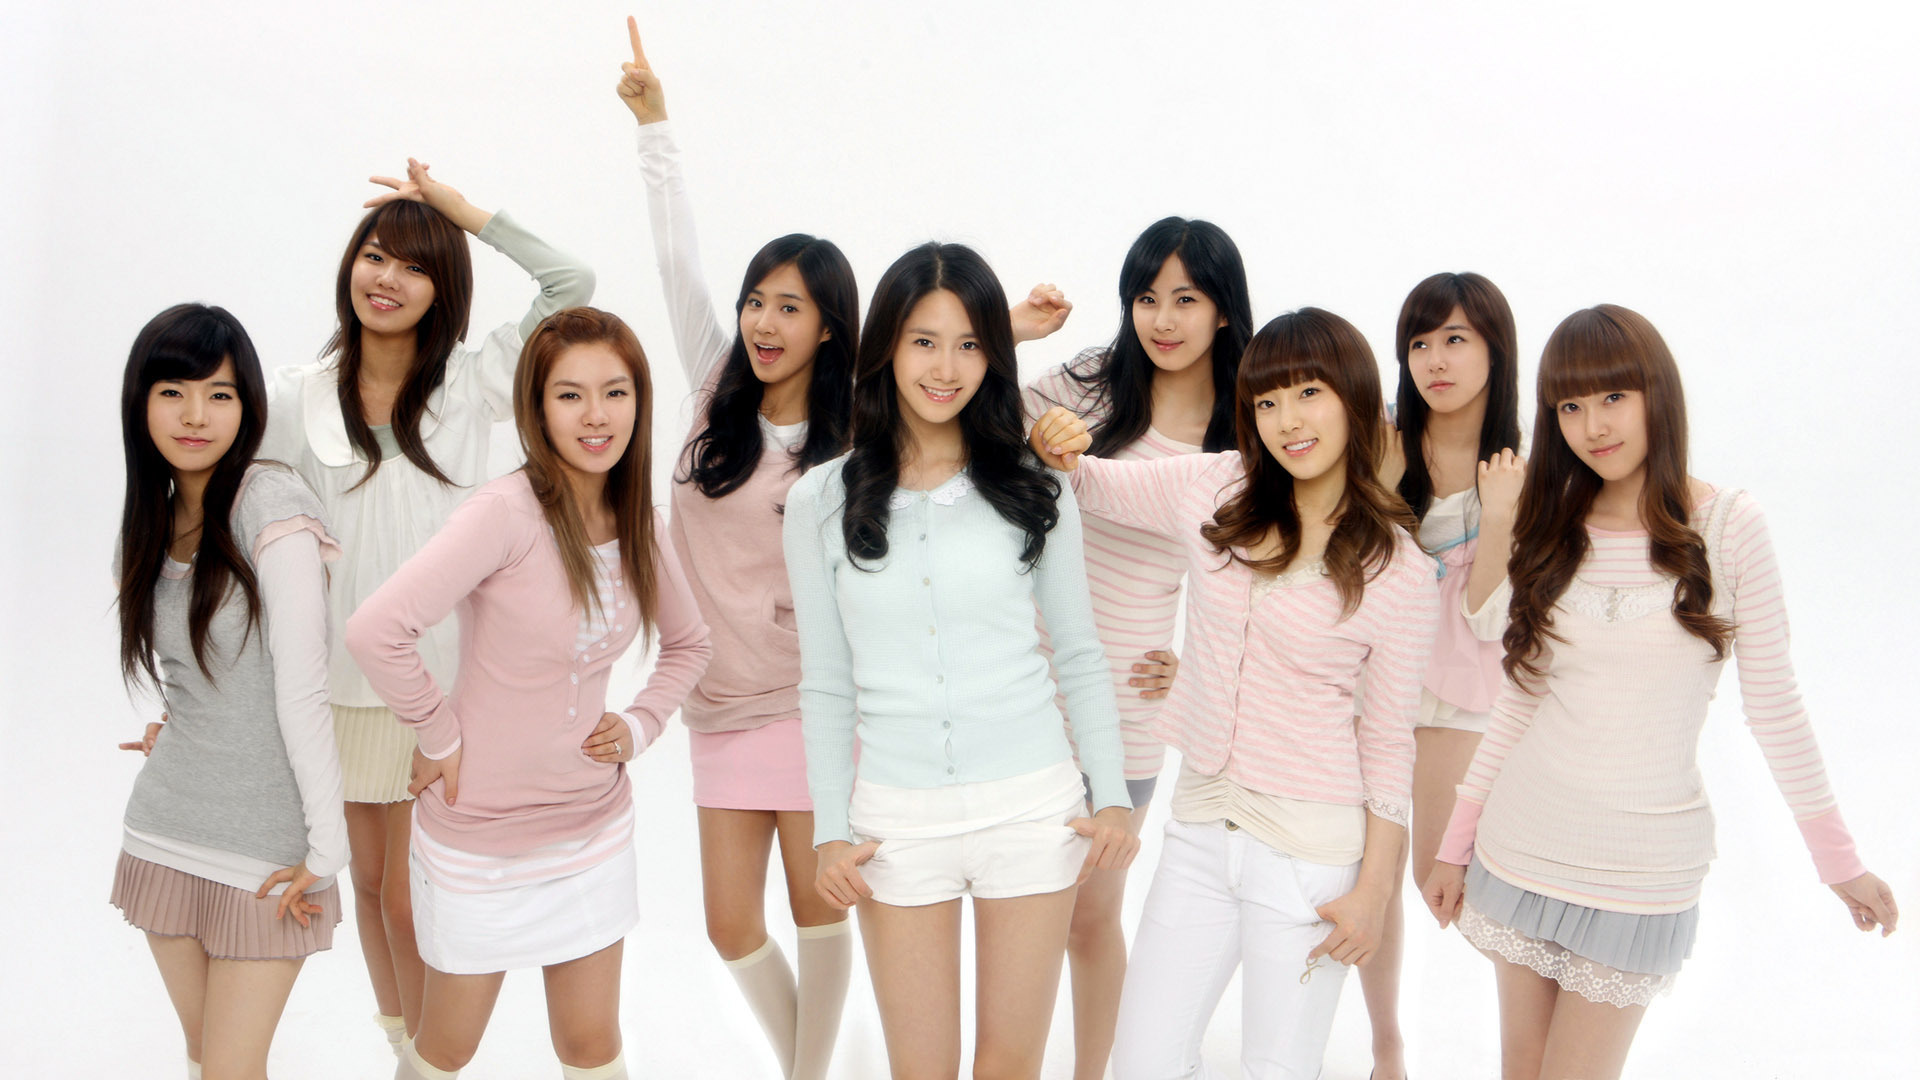 Invincible Youth images afterschool HD wallpaper and 1920x1080